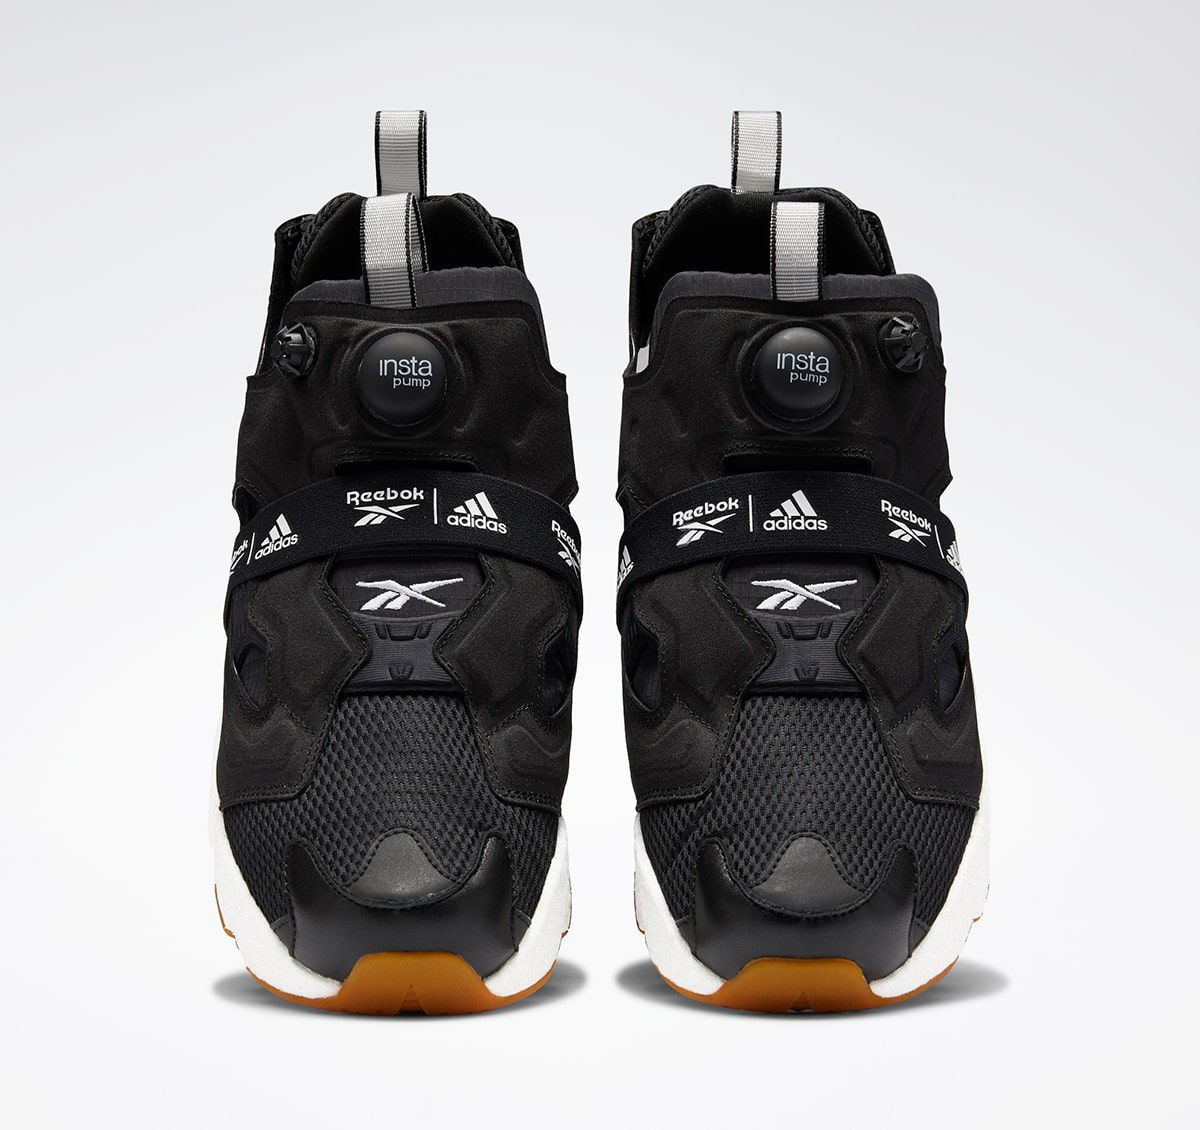 Where to Buy the Reebok Instapump Fury x adidas BOOST Releases 